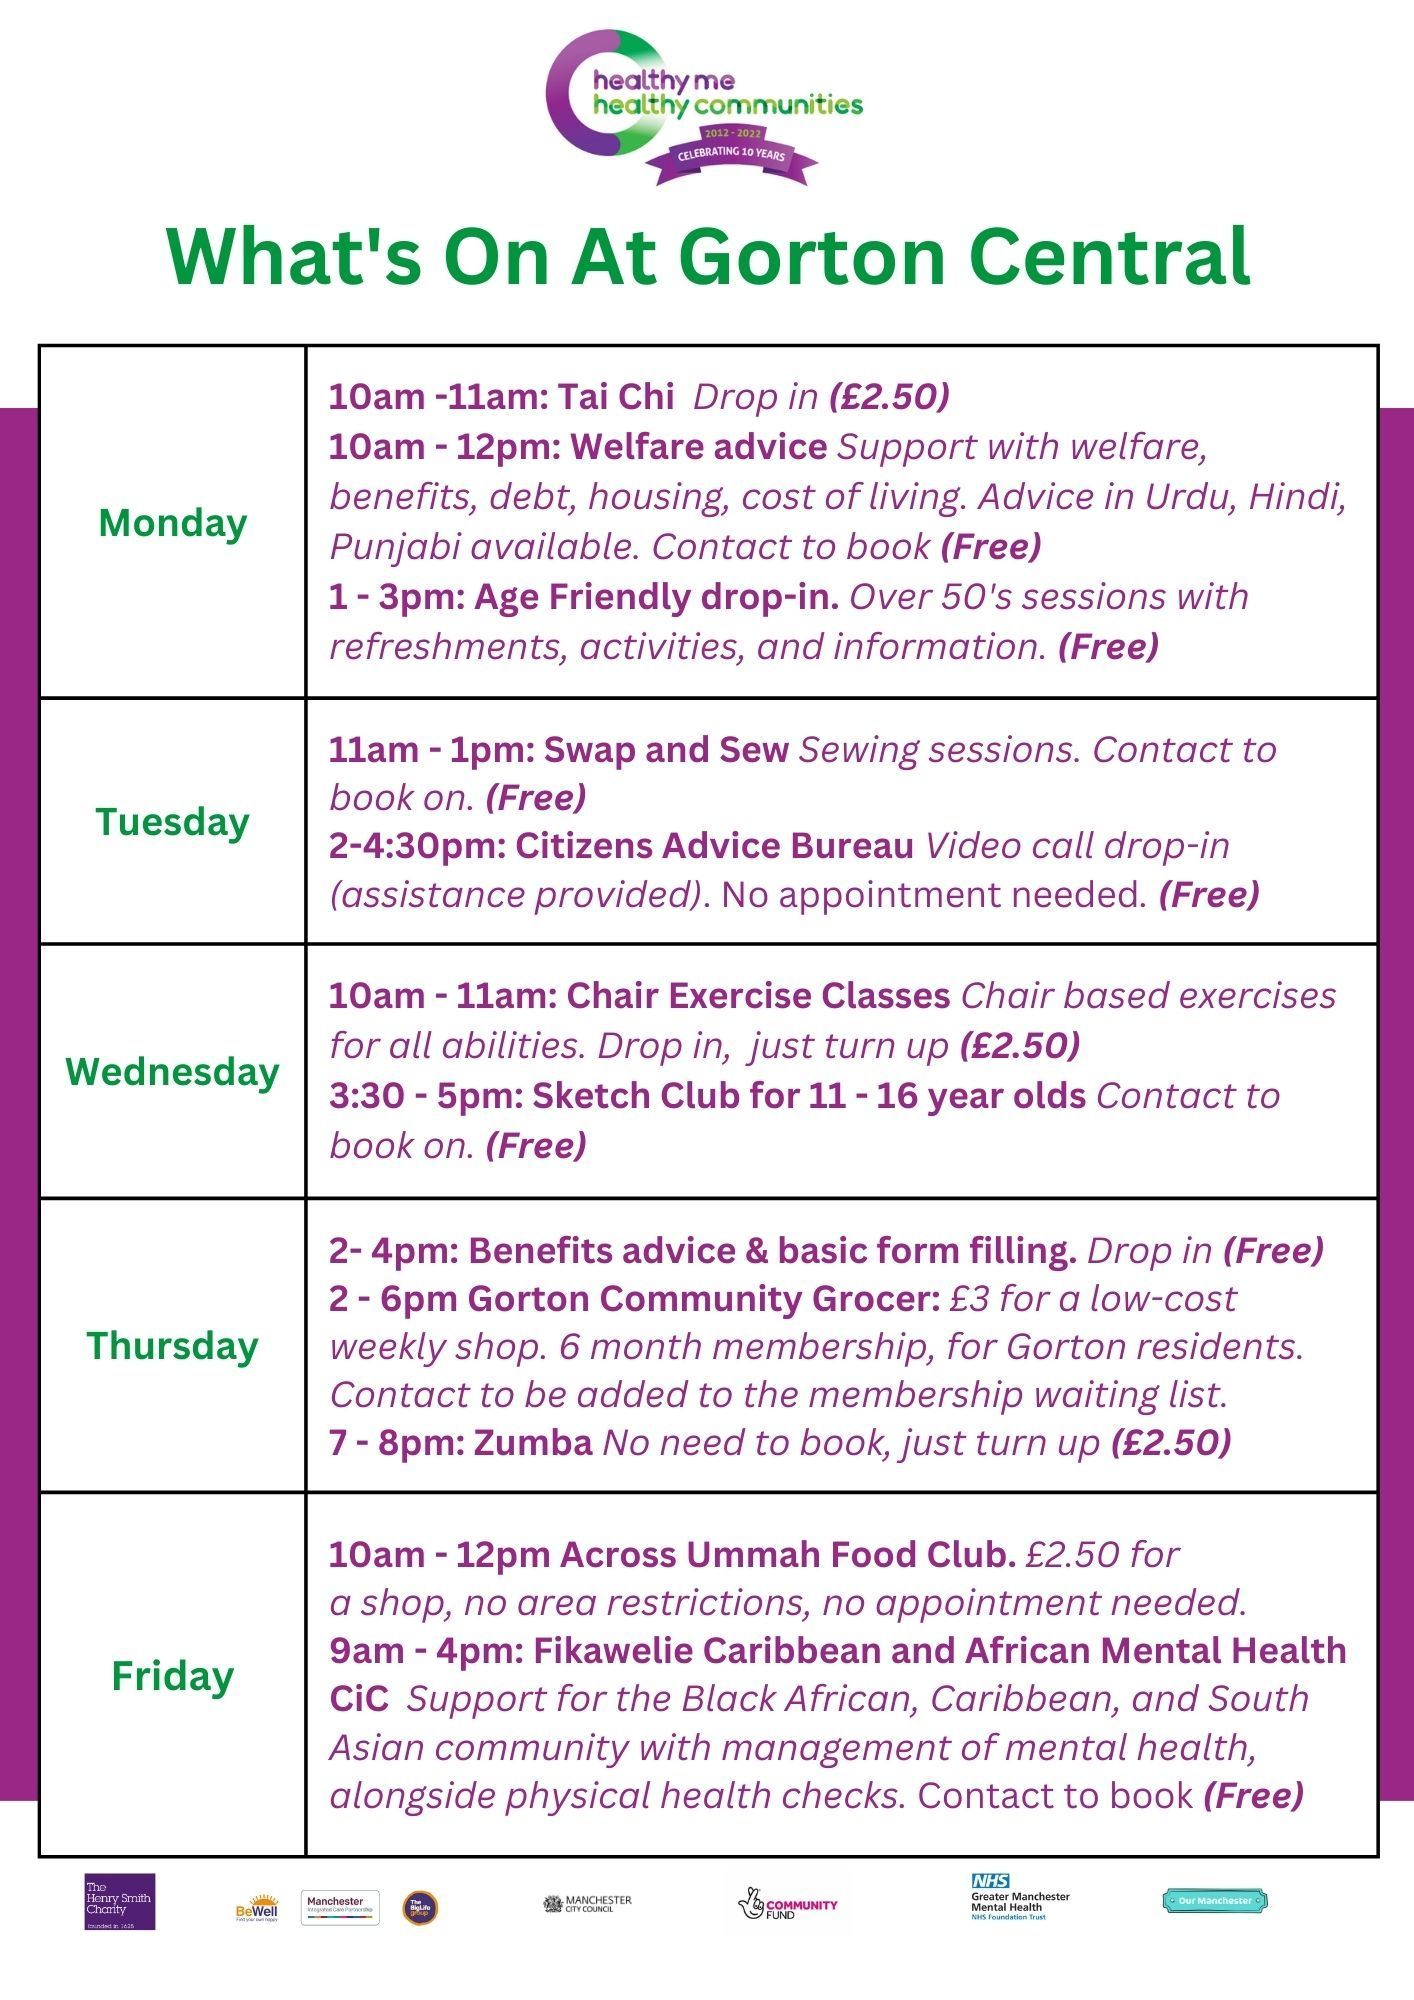 A time table of all activities taking place at Gorton Central throughout the week